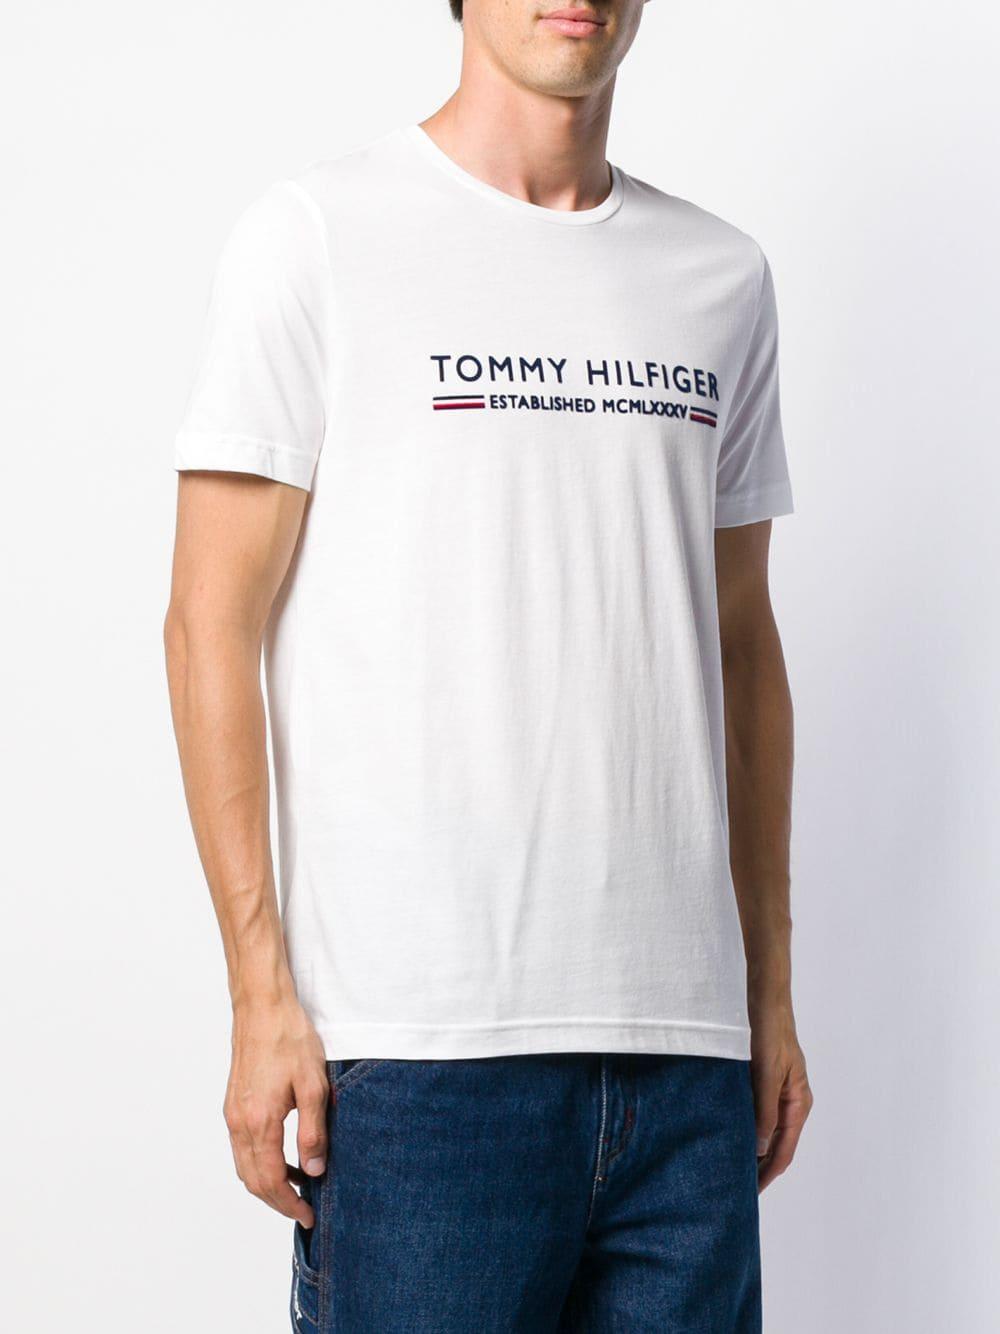 Tommy Hilfiger Mcmlxxxv T-shirt in White for | Lyst